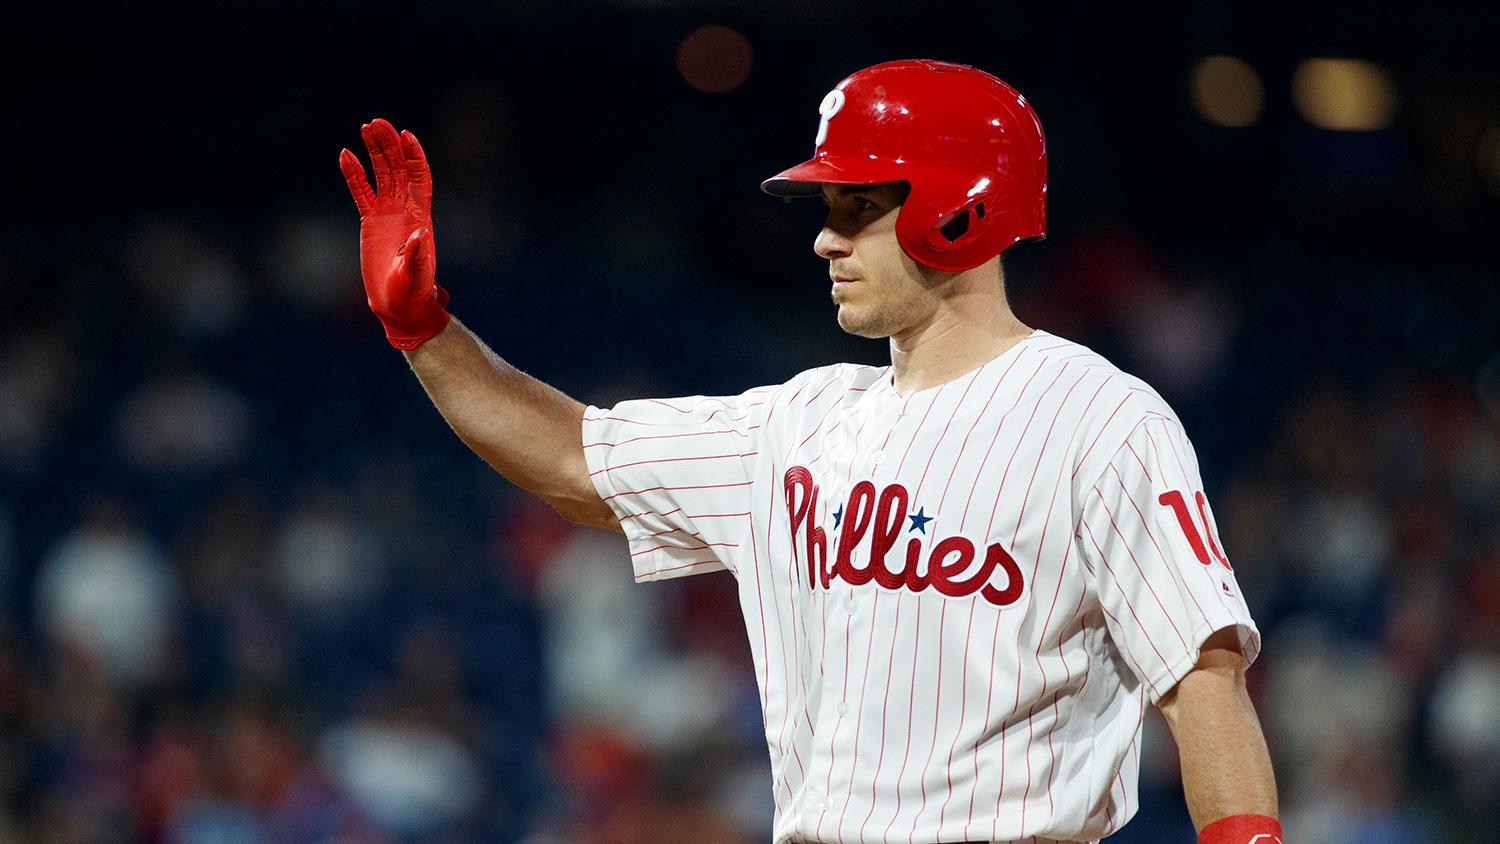 Phillies Have Just One All Star In J.T. Realmuto, Which Few